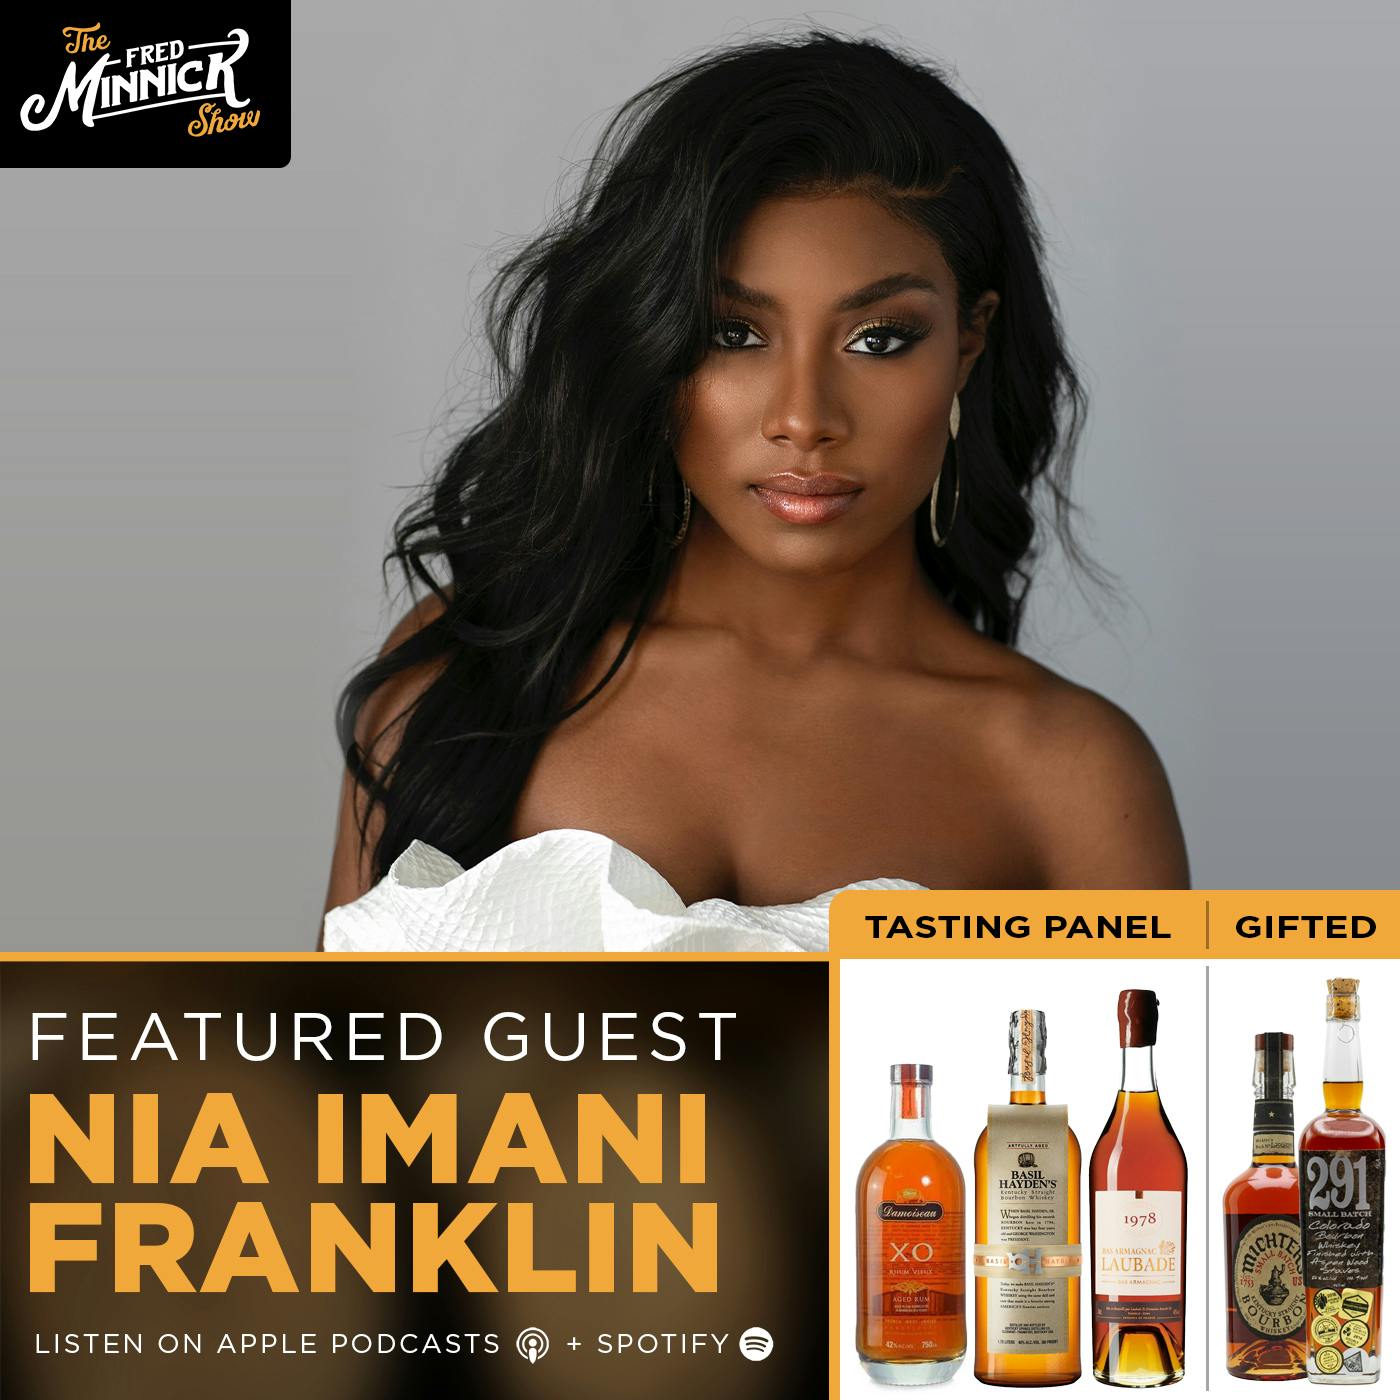 Miss America Nia Imani Franklin | Basil Hayden’s 10 Year | What’s It Like Being Miss America?